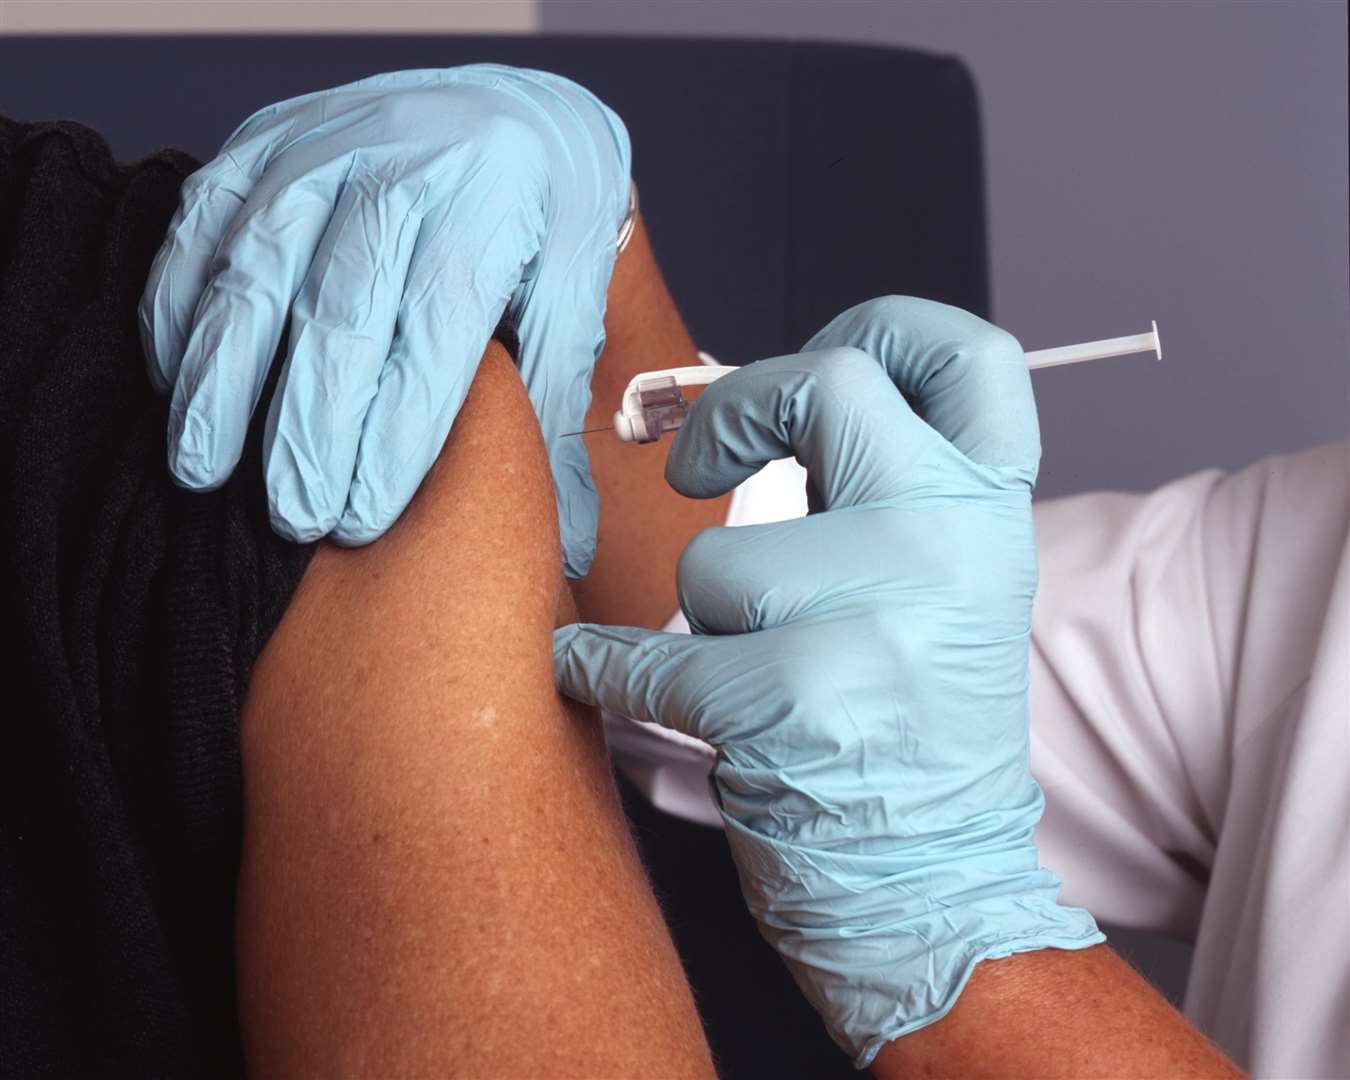 The number of people being vaccinated in Kent has fallen dramatically in recent weeks.